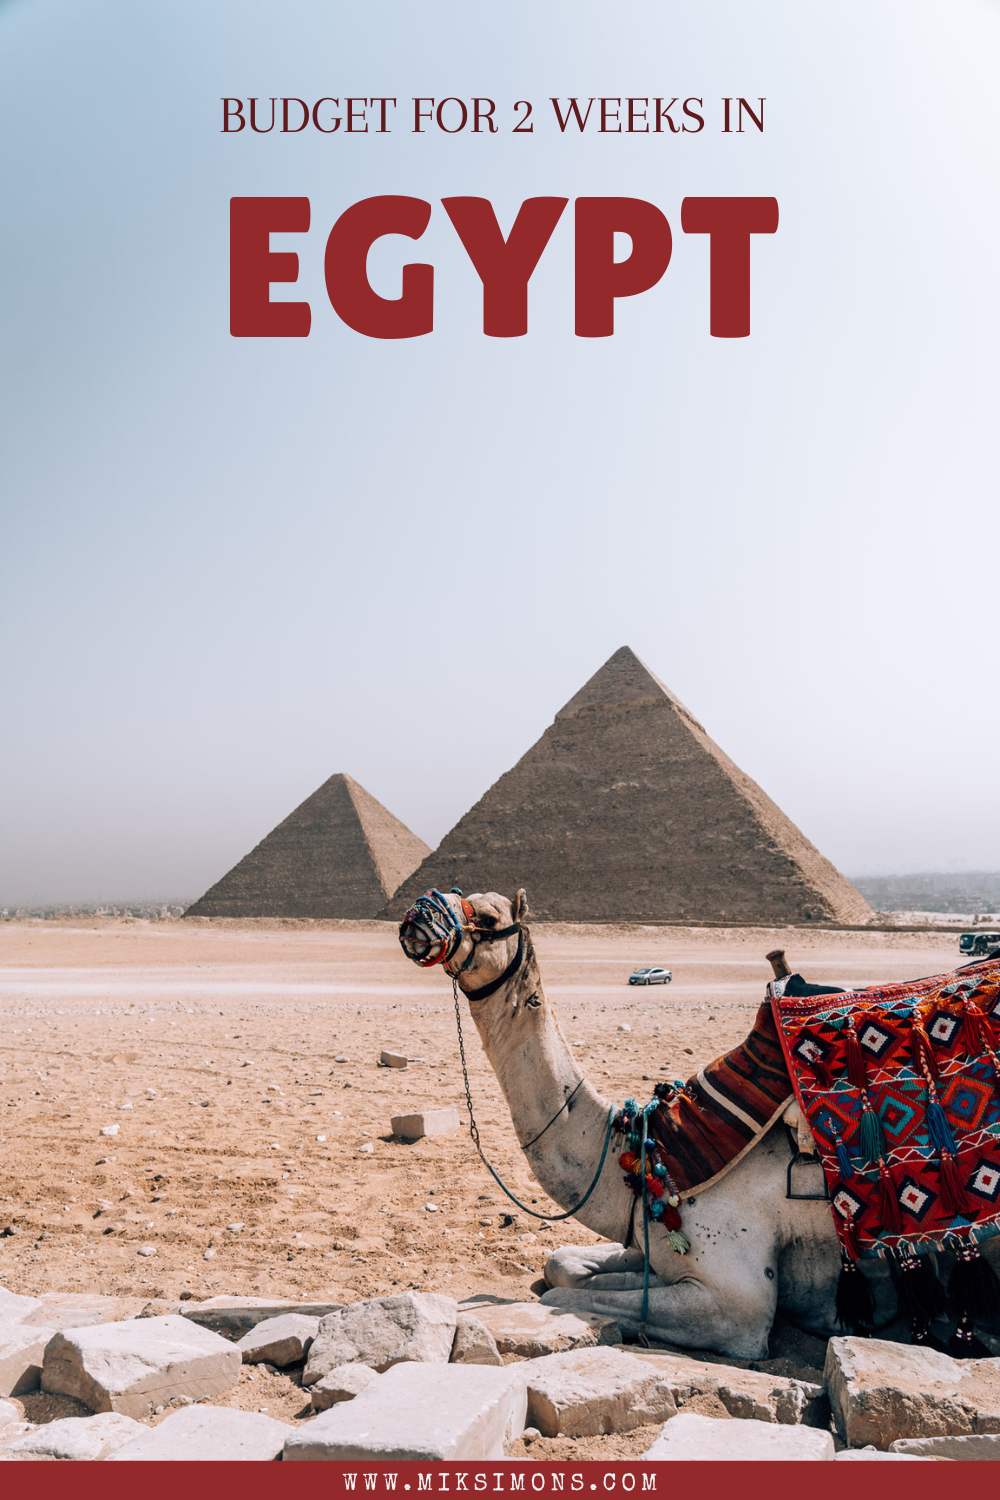 How much does a trip to Egypt cost? Budget for 2 weeks in Egypt